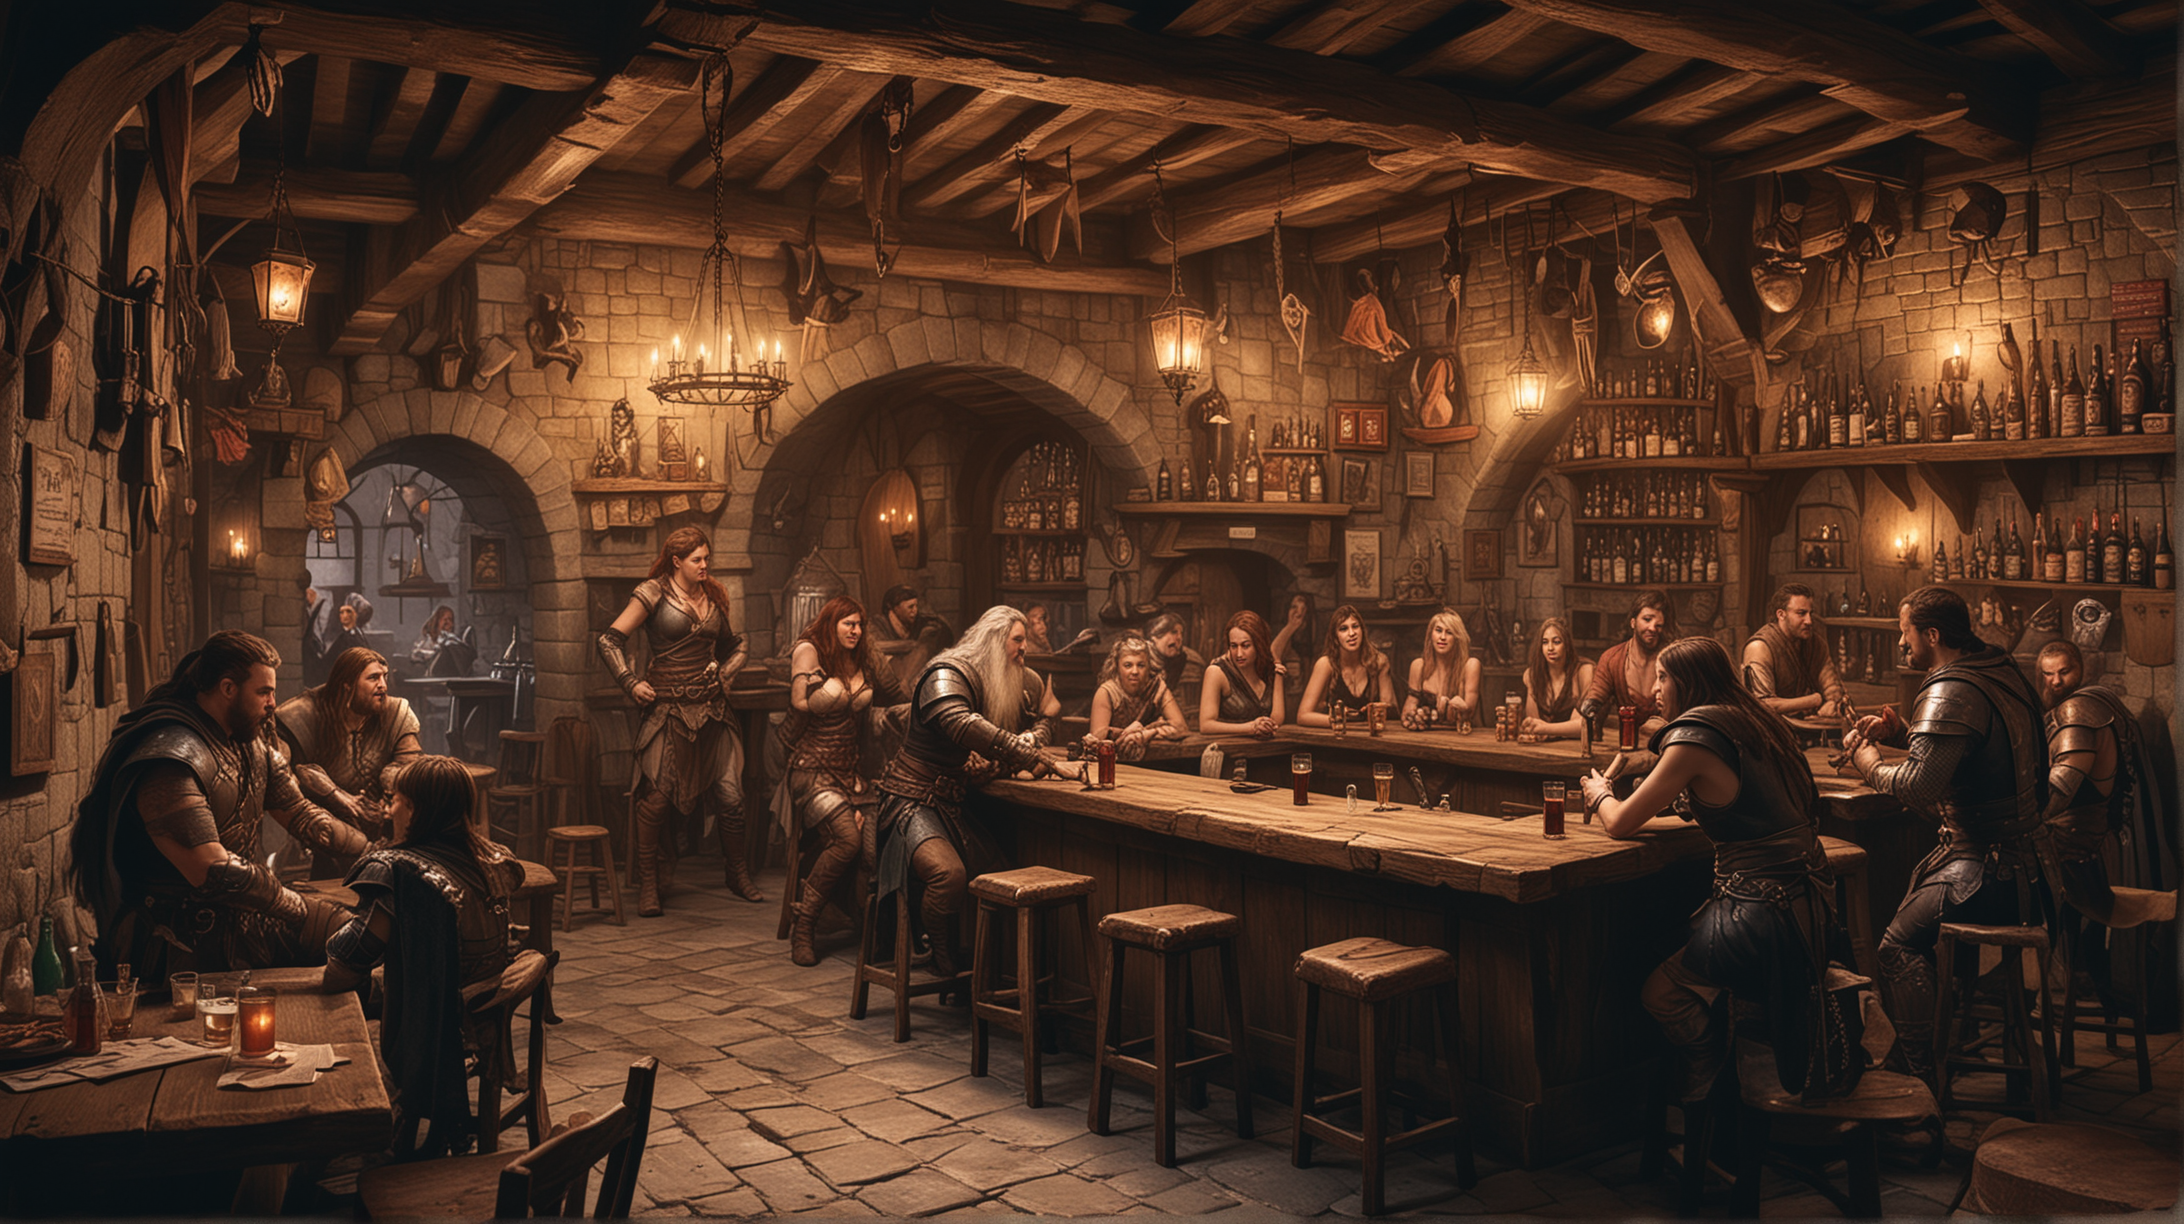 medieval bar full of dungeons and dragons characters in skimpy clothes